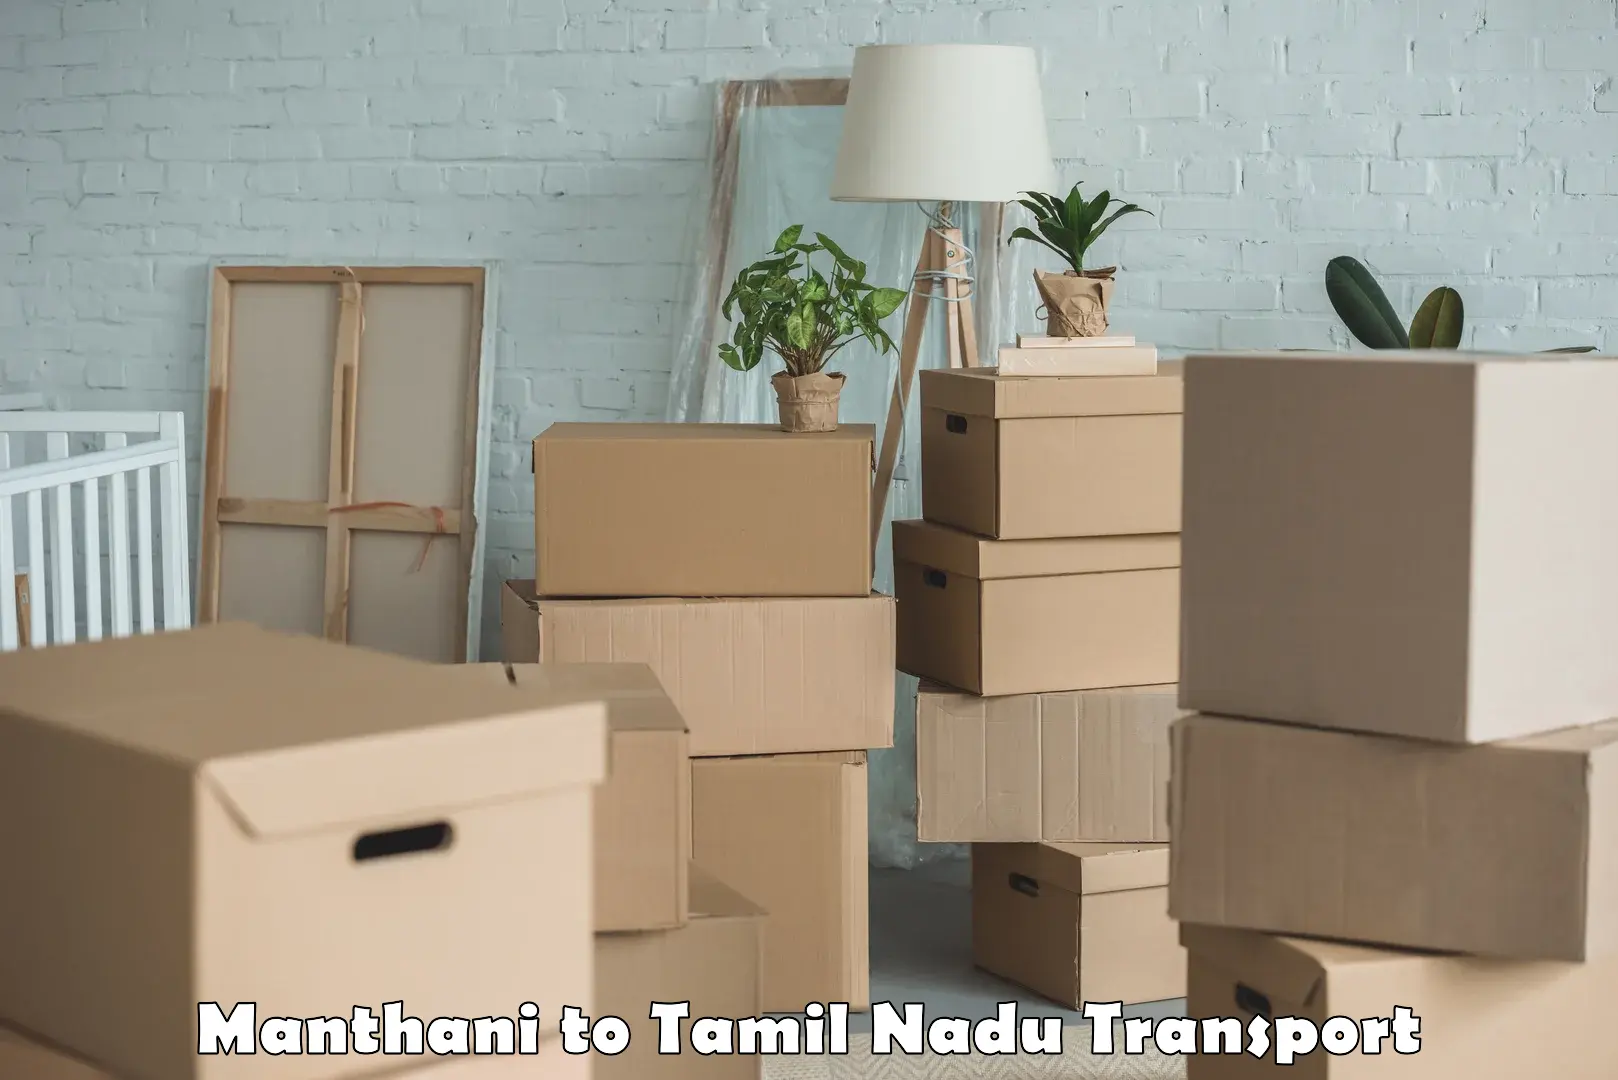 Daily parcel service transport Manthani to Trichy